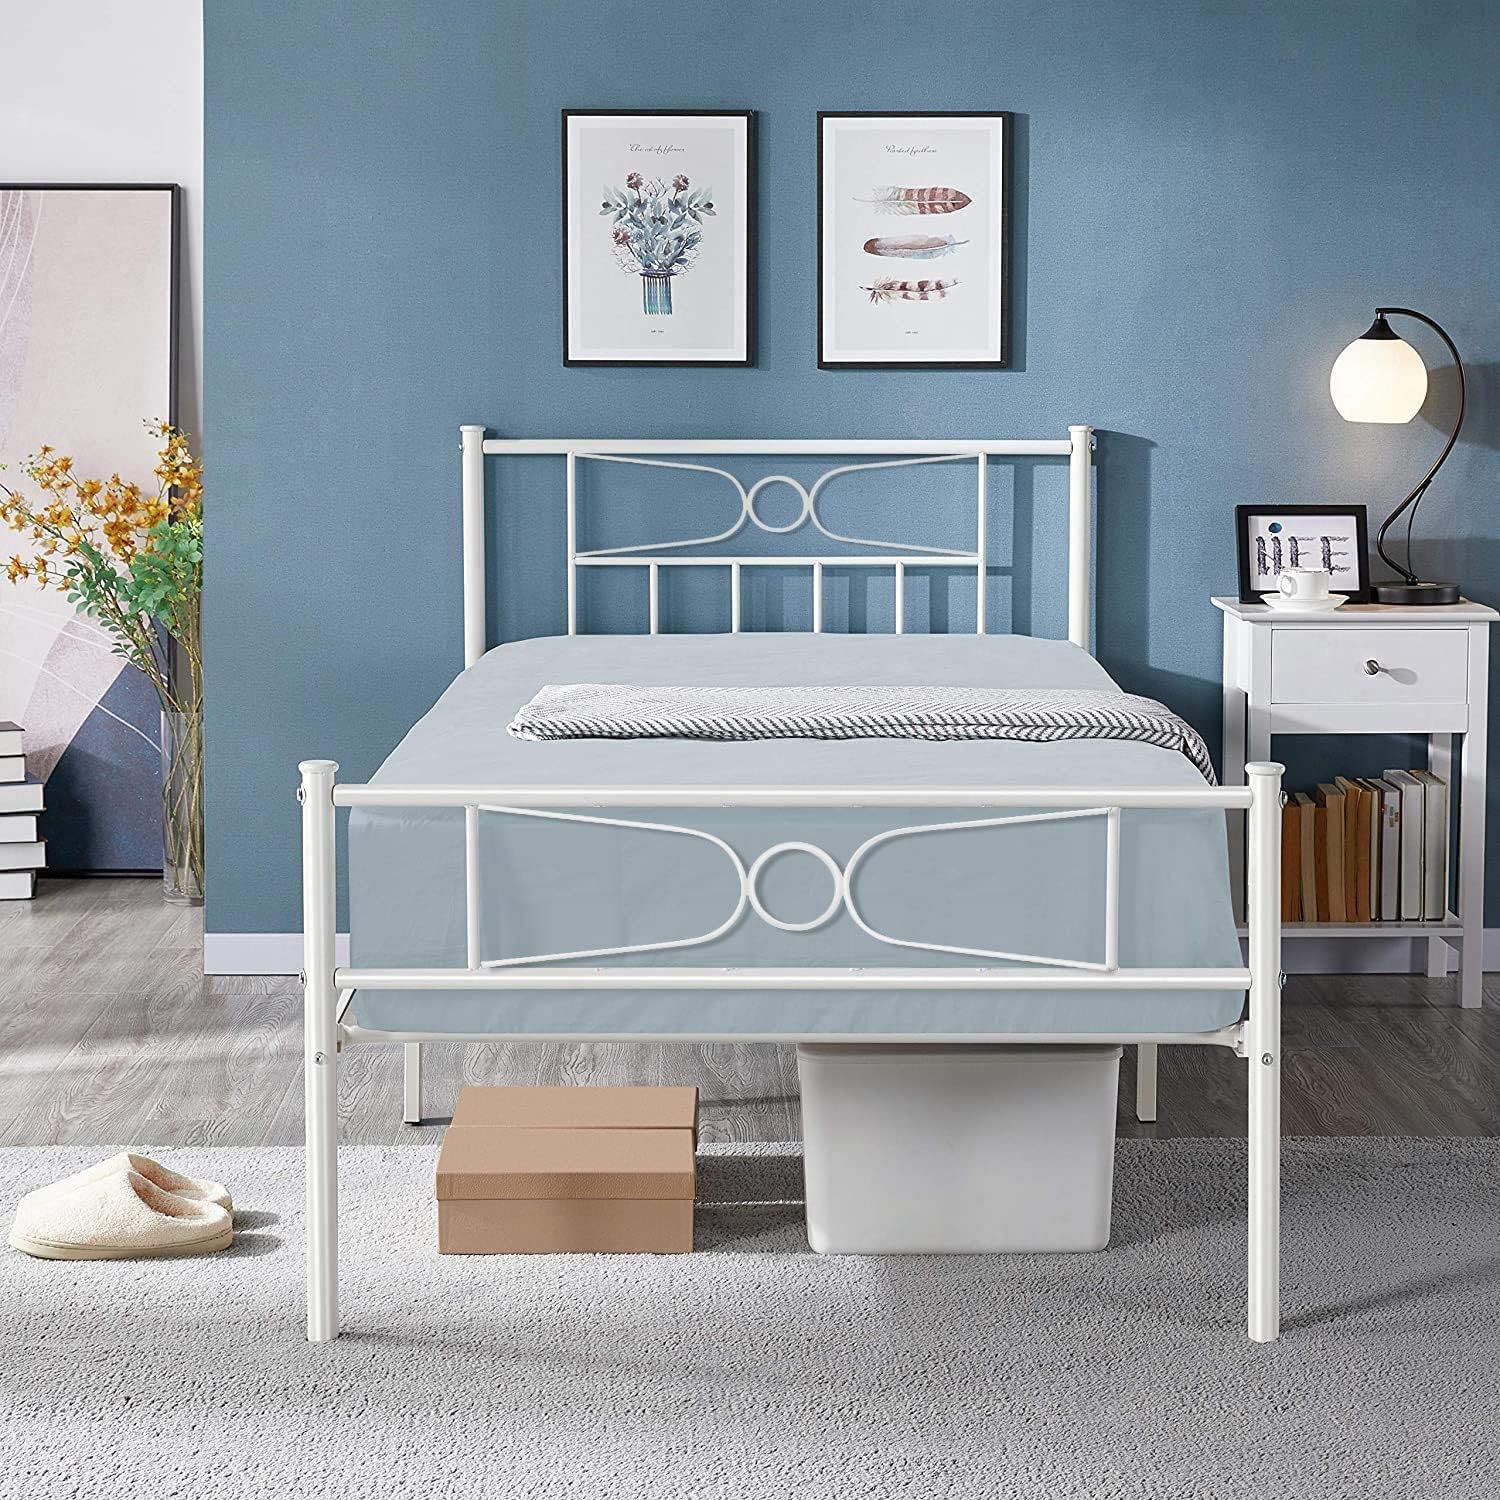 GIME Twin Size Bed Frames with Storage for Girls Boys Adults, Metal White Bed Frame No Box Spring Needed, Single Bed Platform Mattress Foundation with Headboard/Footboard for Student